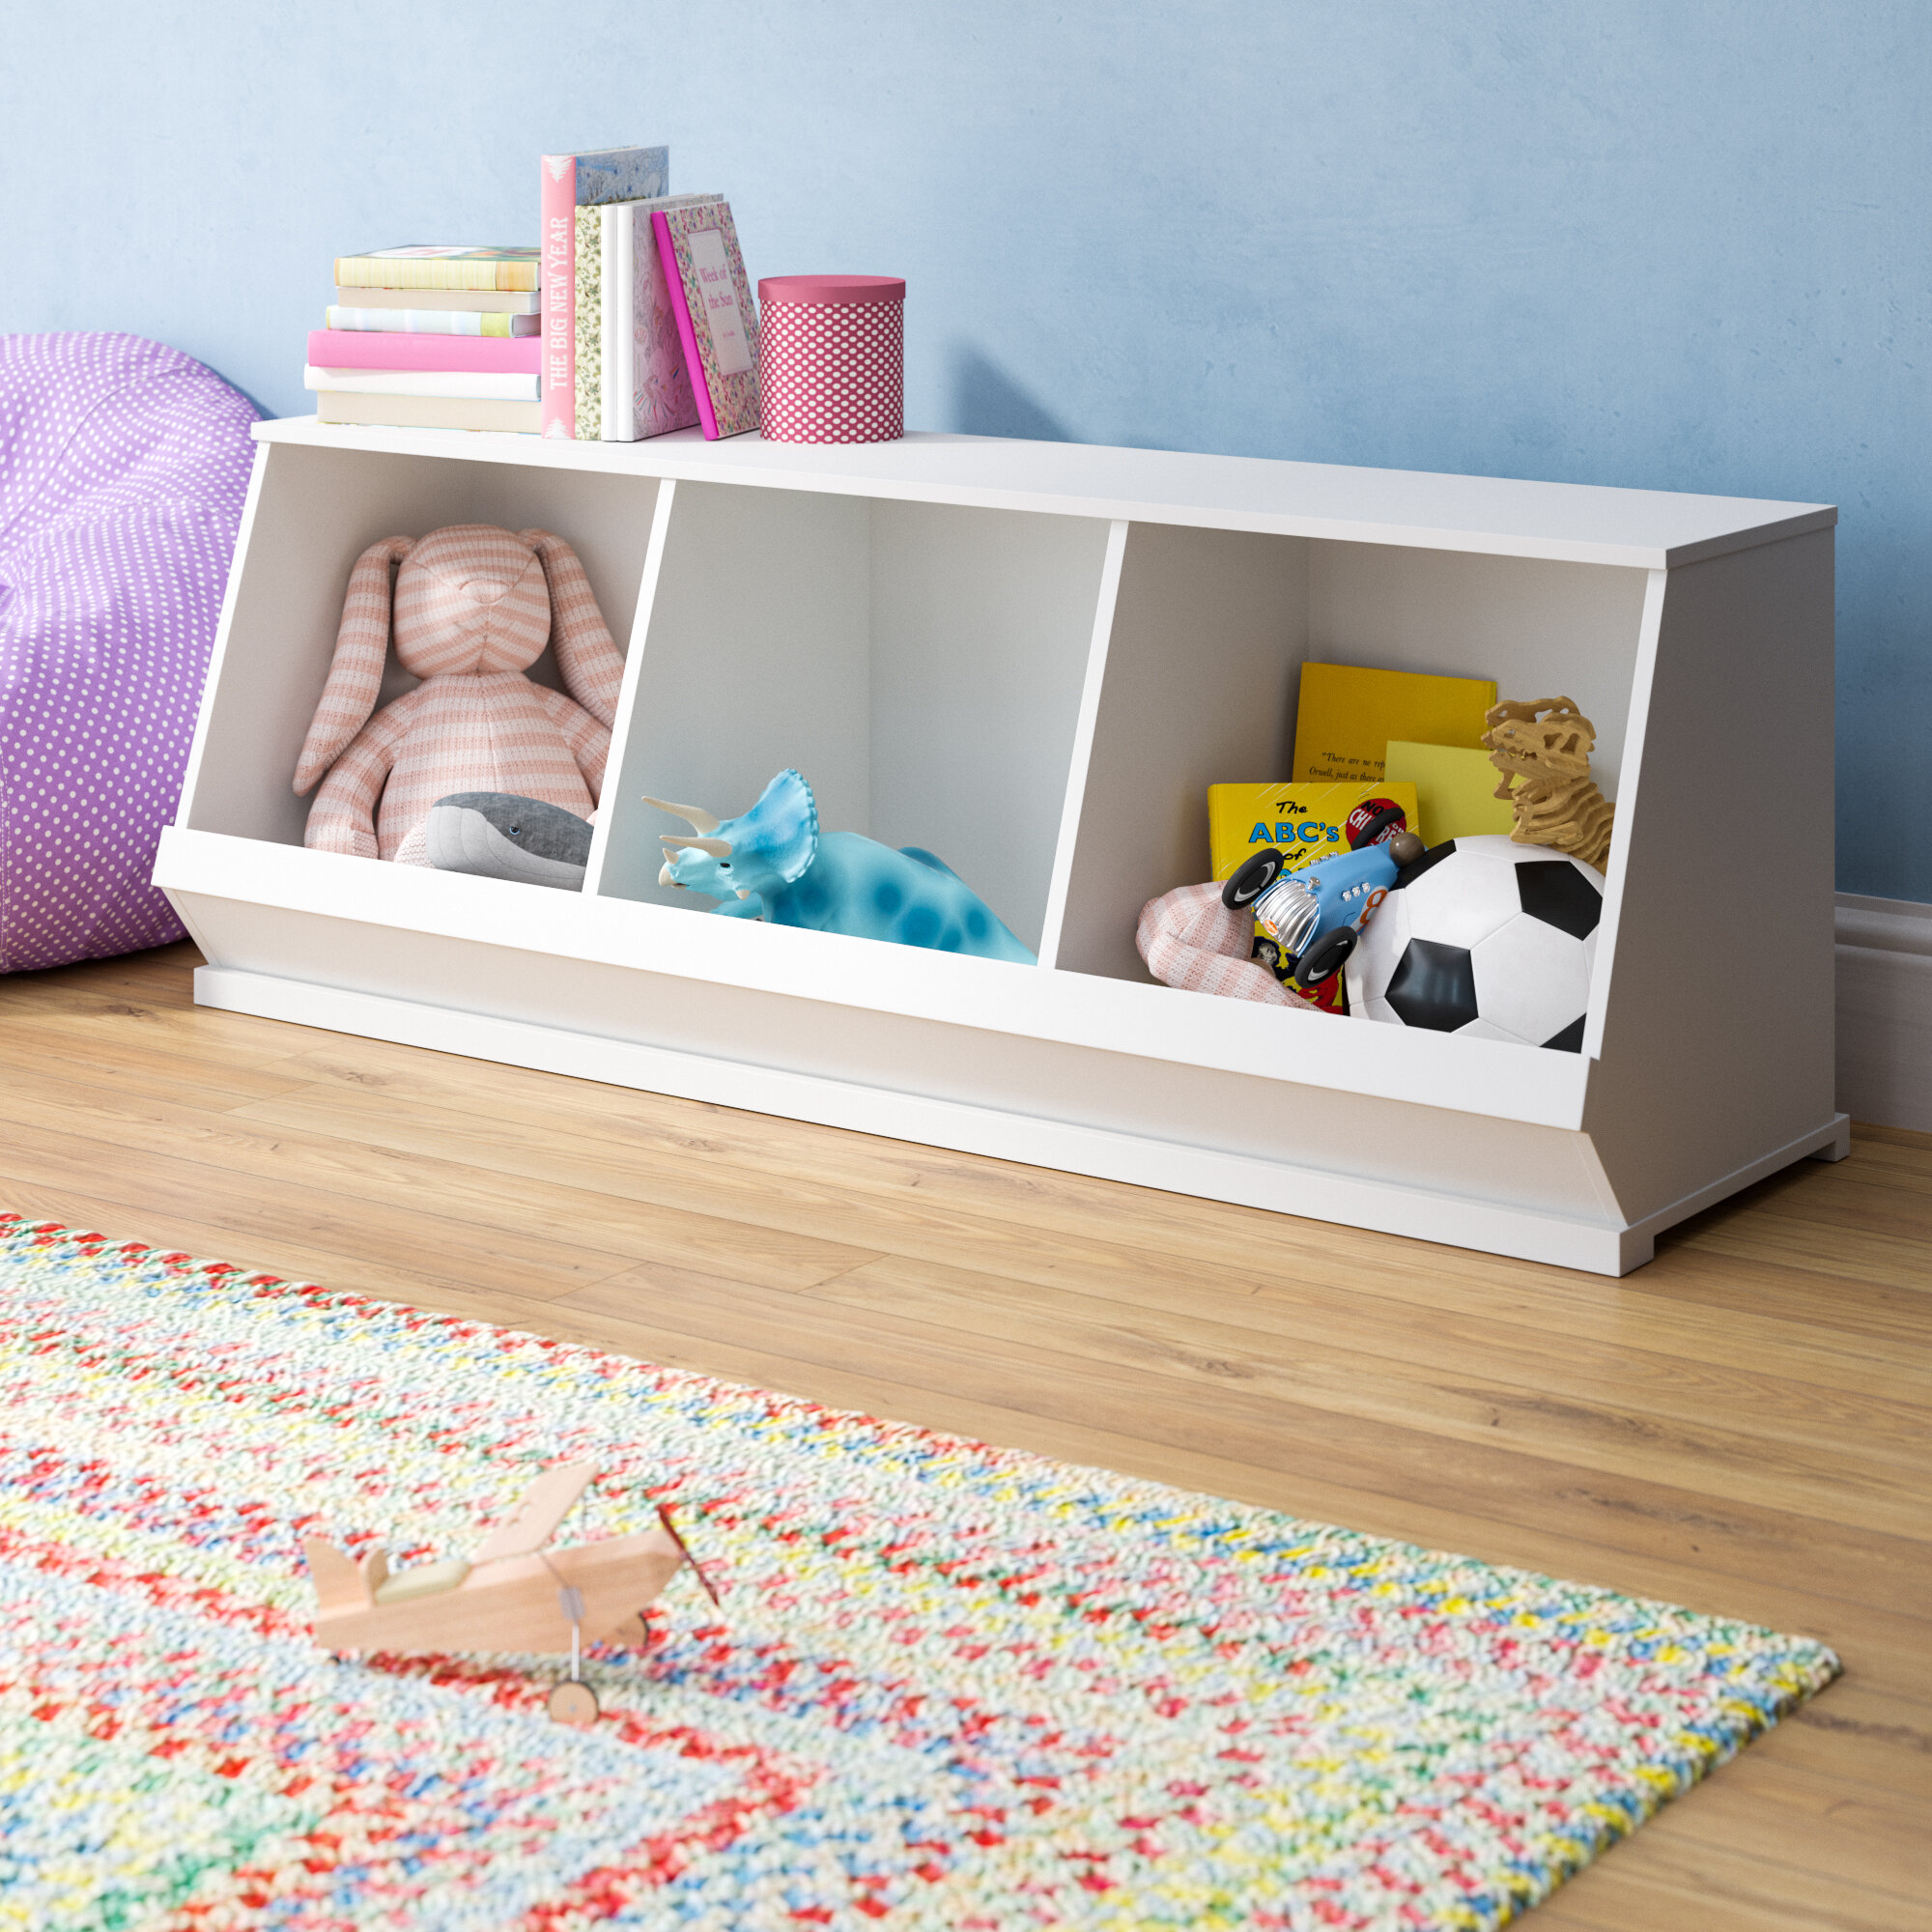 plain toy box to decorate